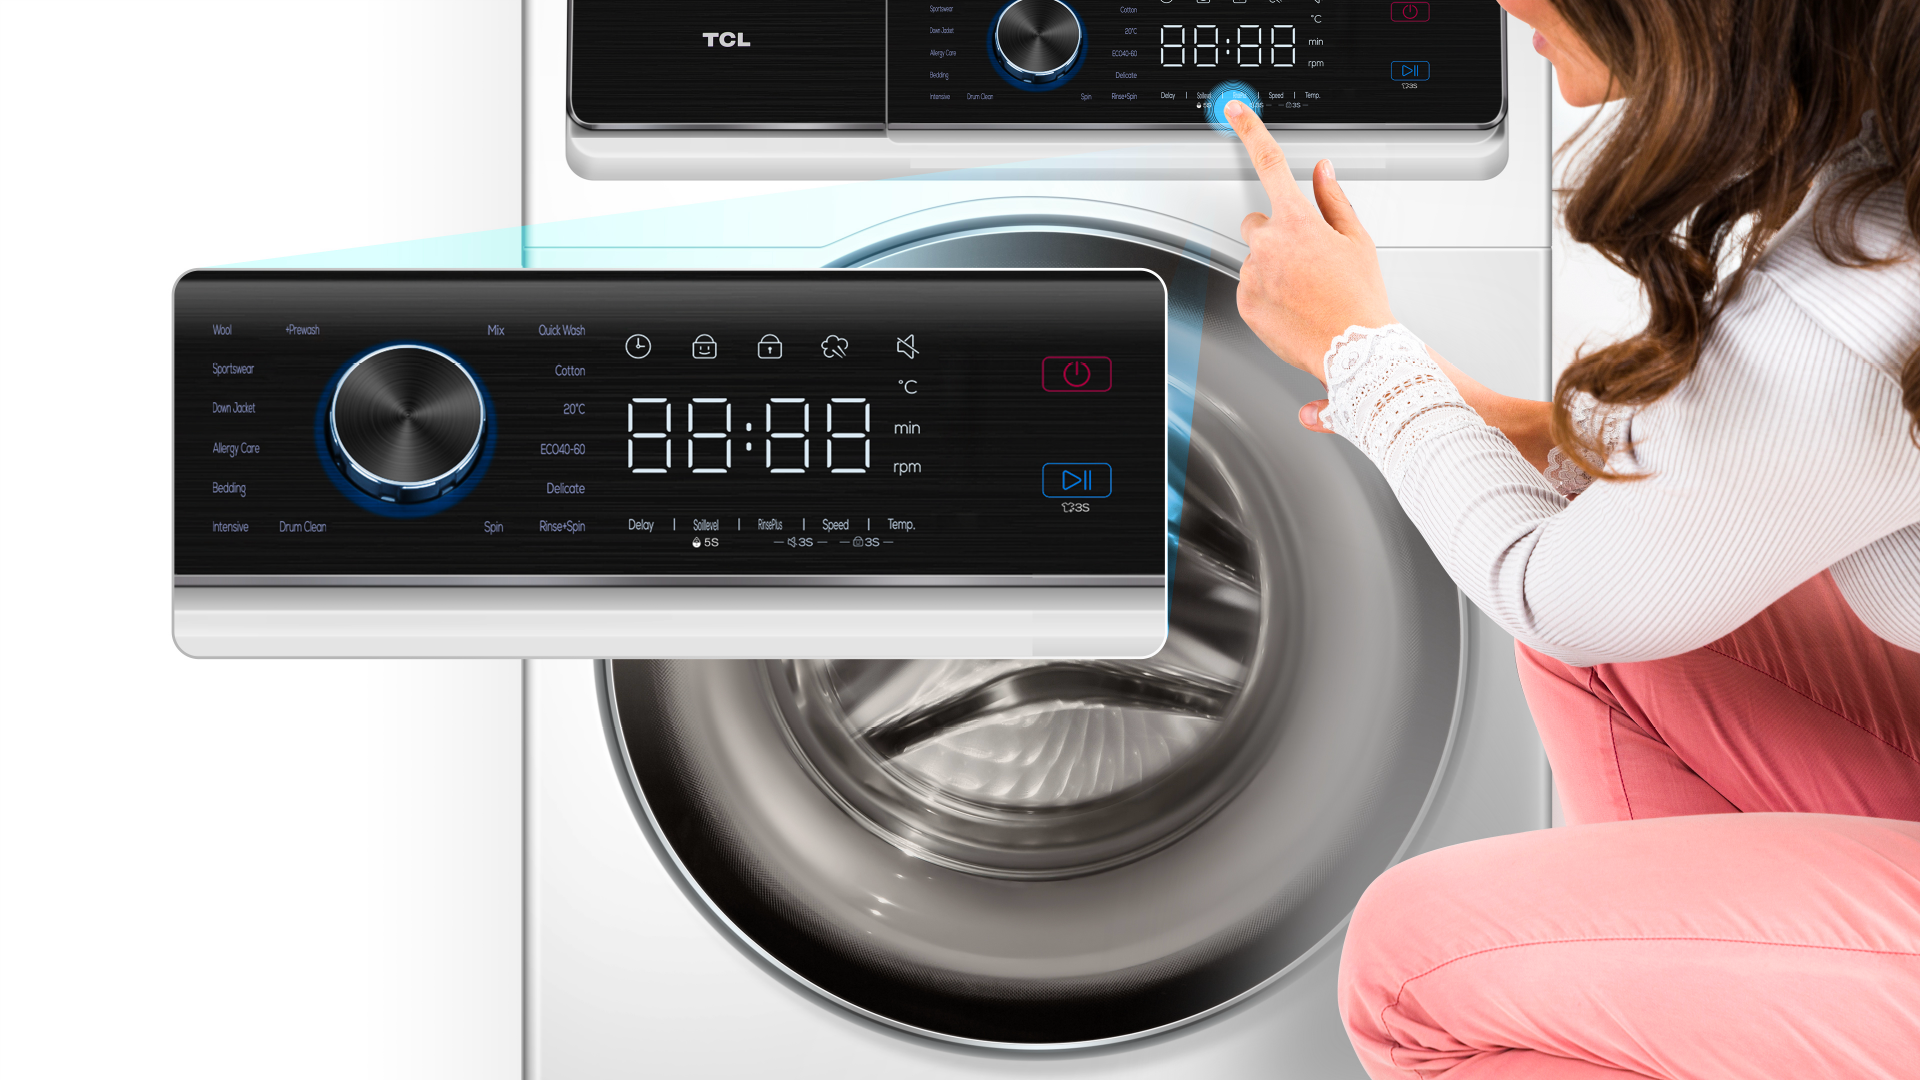 TCL Washing Machine fp0924wc0 Touch Control Display